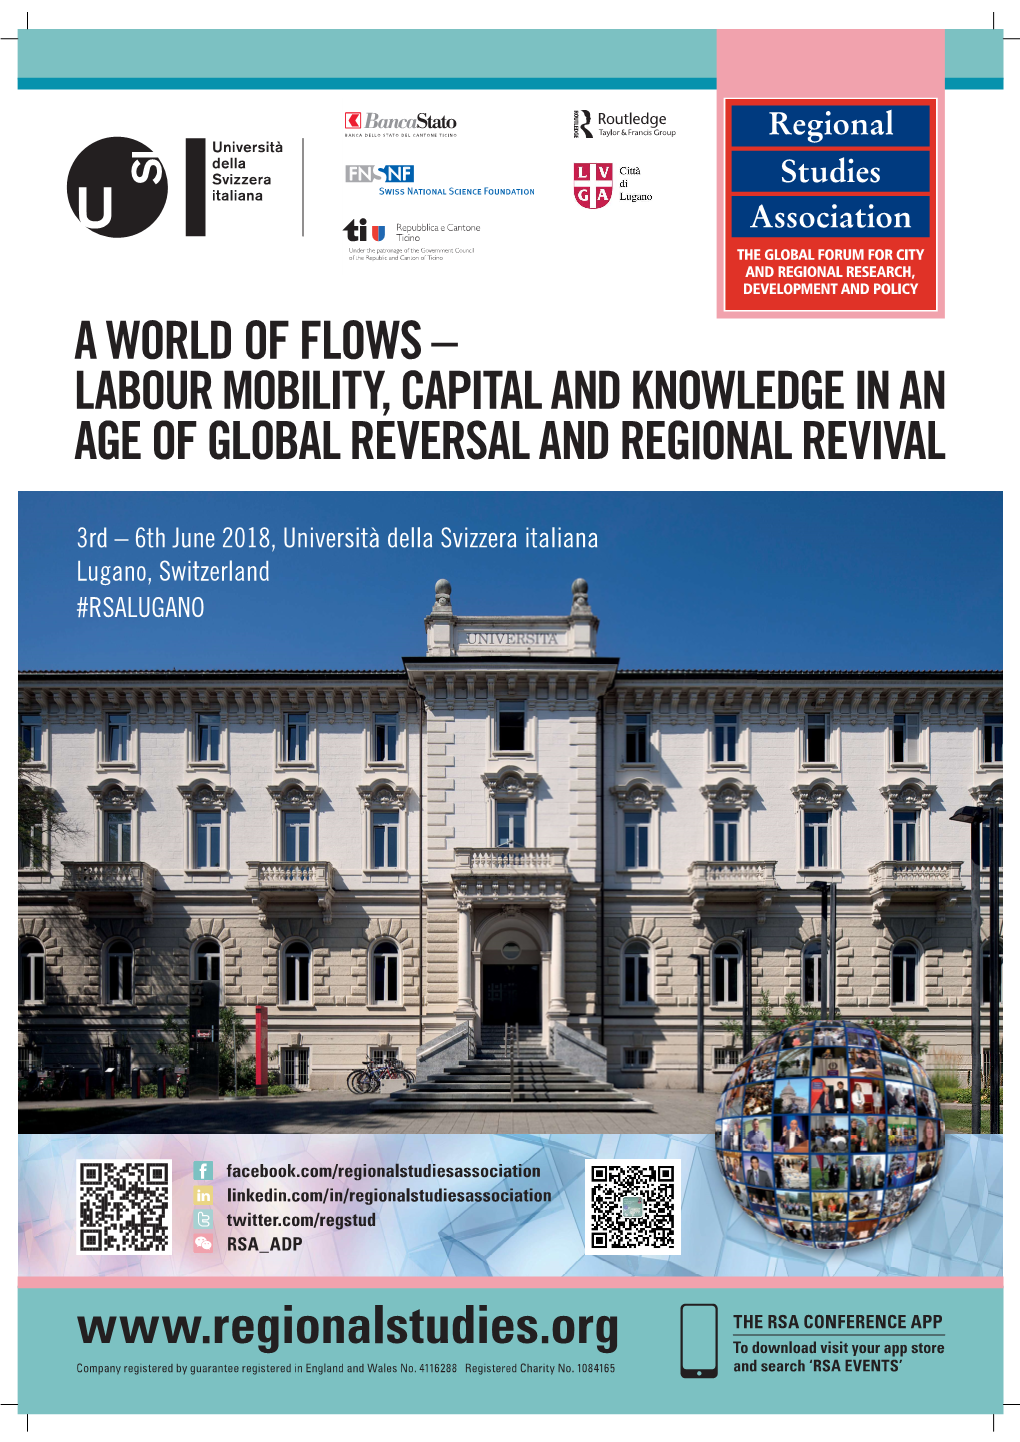 A World of Flows: Labour Mobility, Capital and Knowledge in an Age of Global Reversal and Regional Revival 2018 Annual Conference 3Rd –6Th June 2018